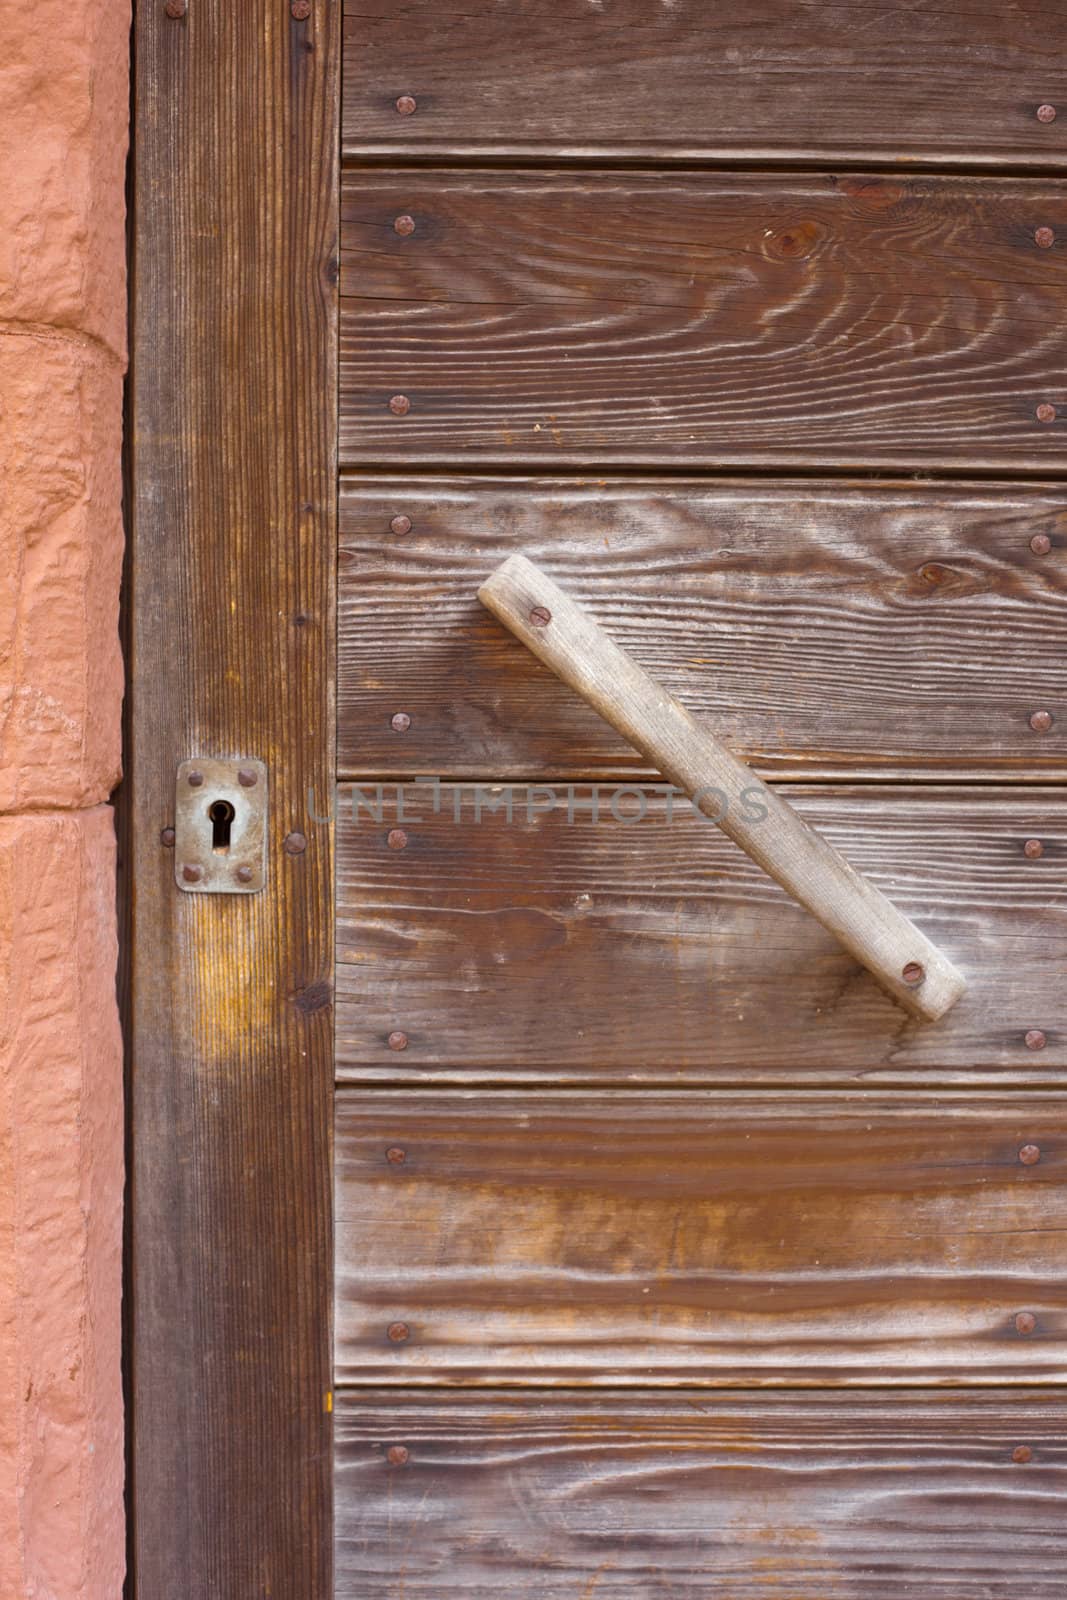 Old locked wooden door with key-hole and simple handle.